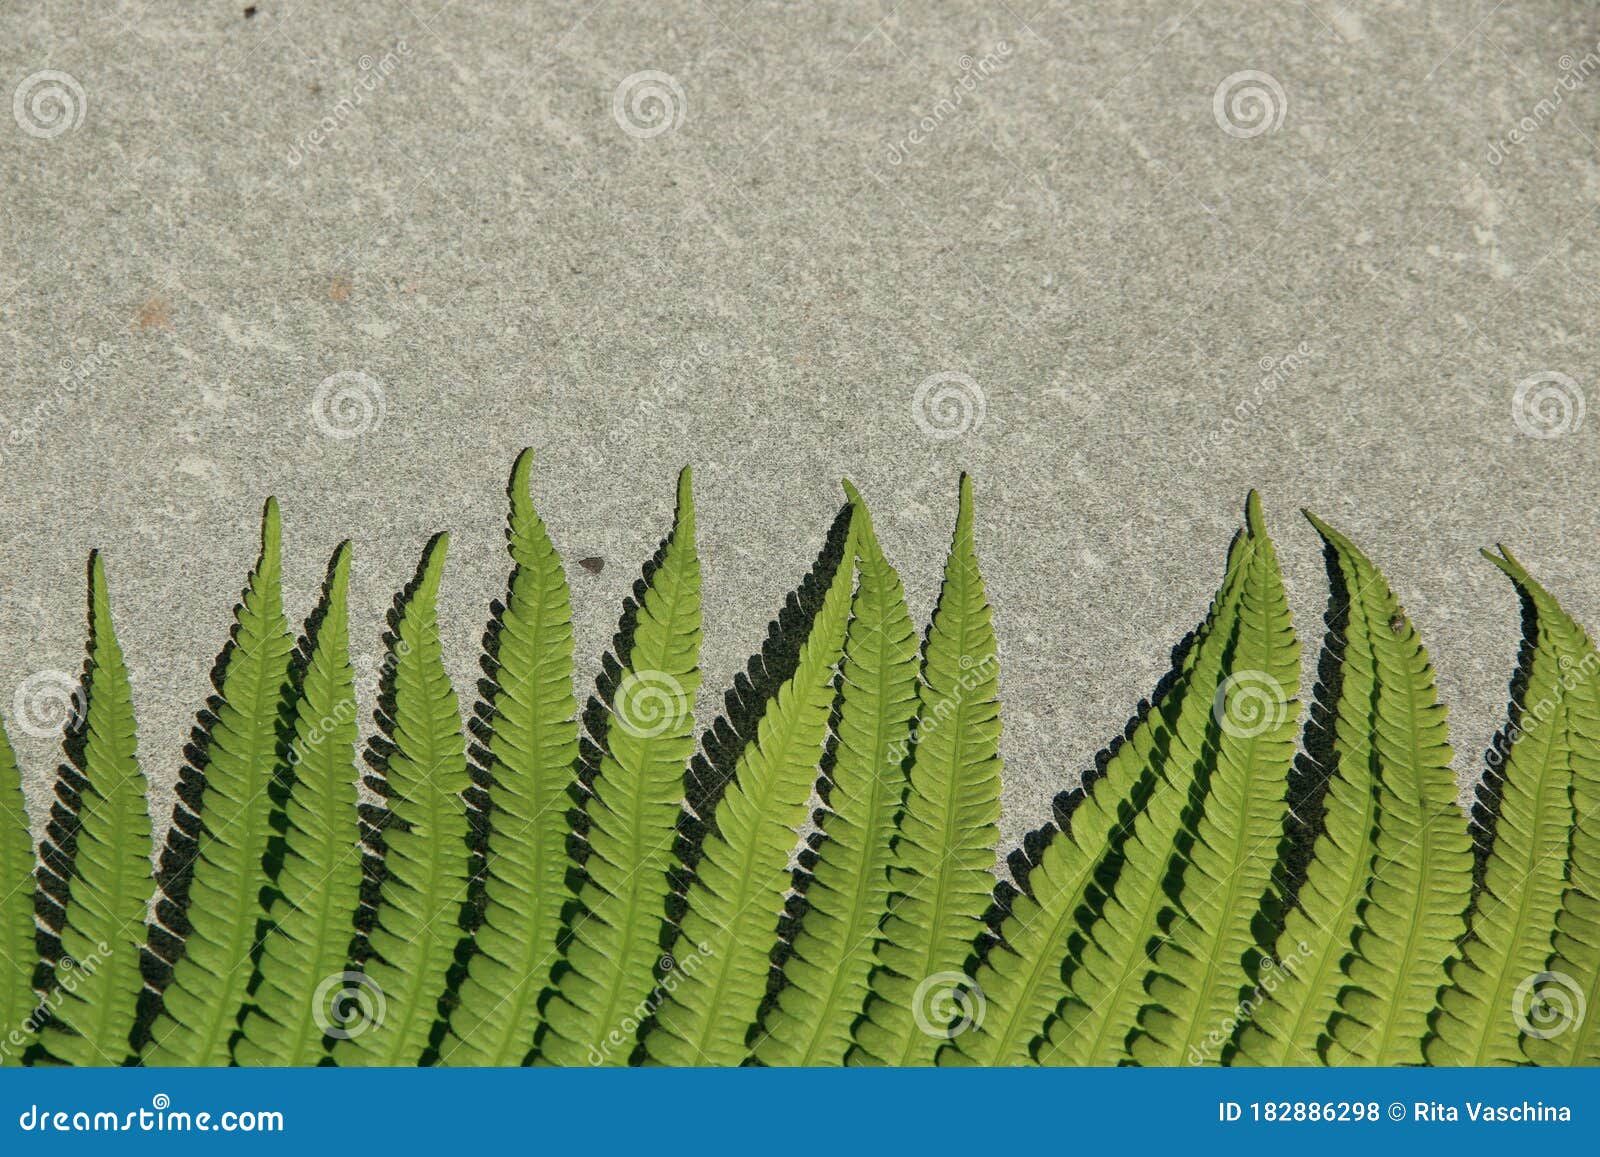 Fern Leaf on Grey Background. Place for Text Stock Photo - Image of